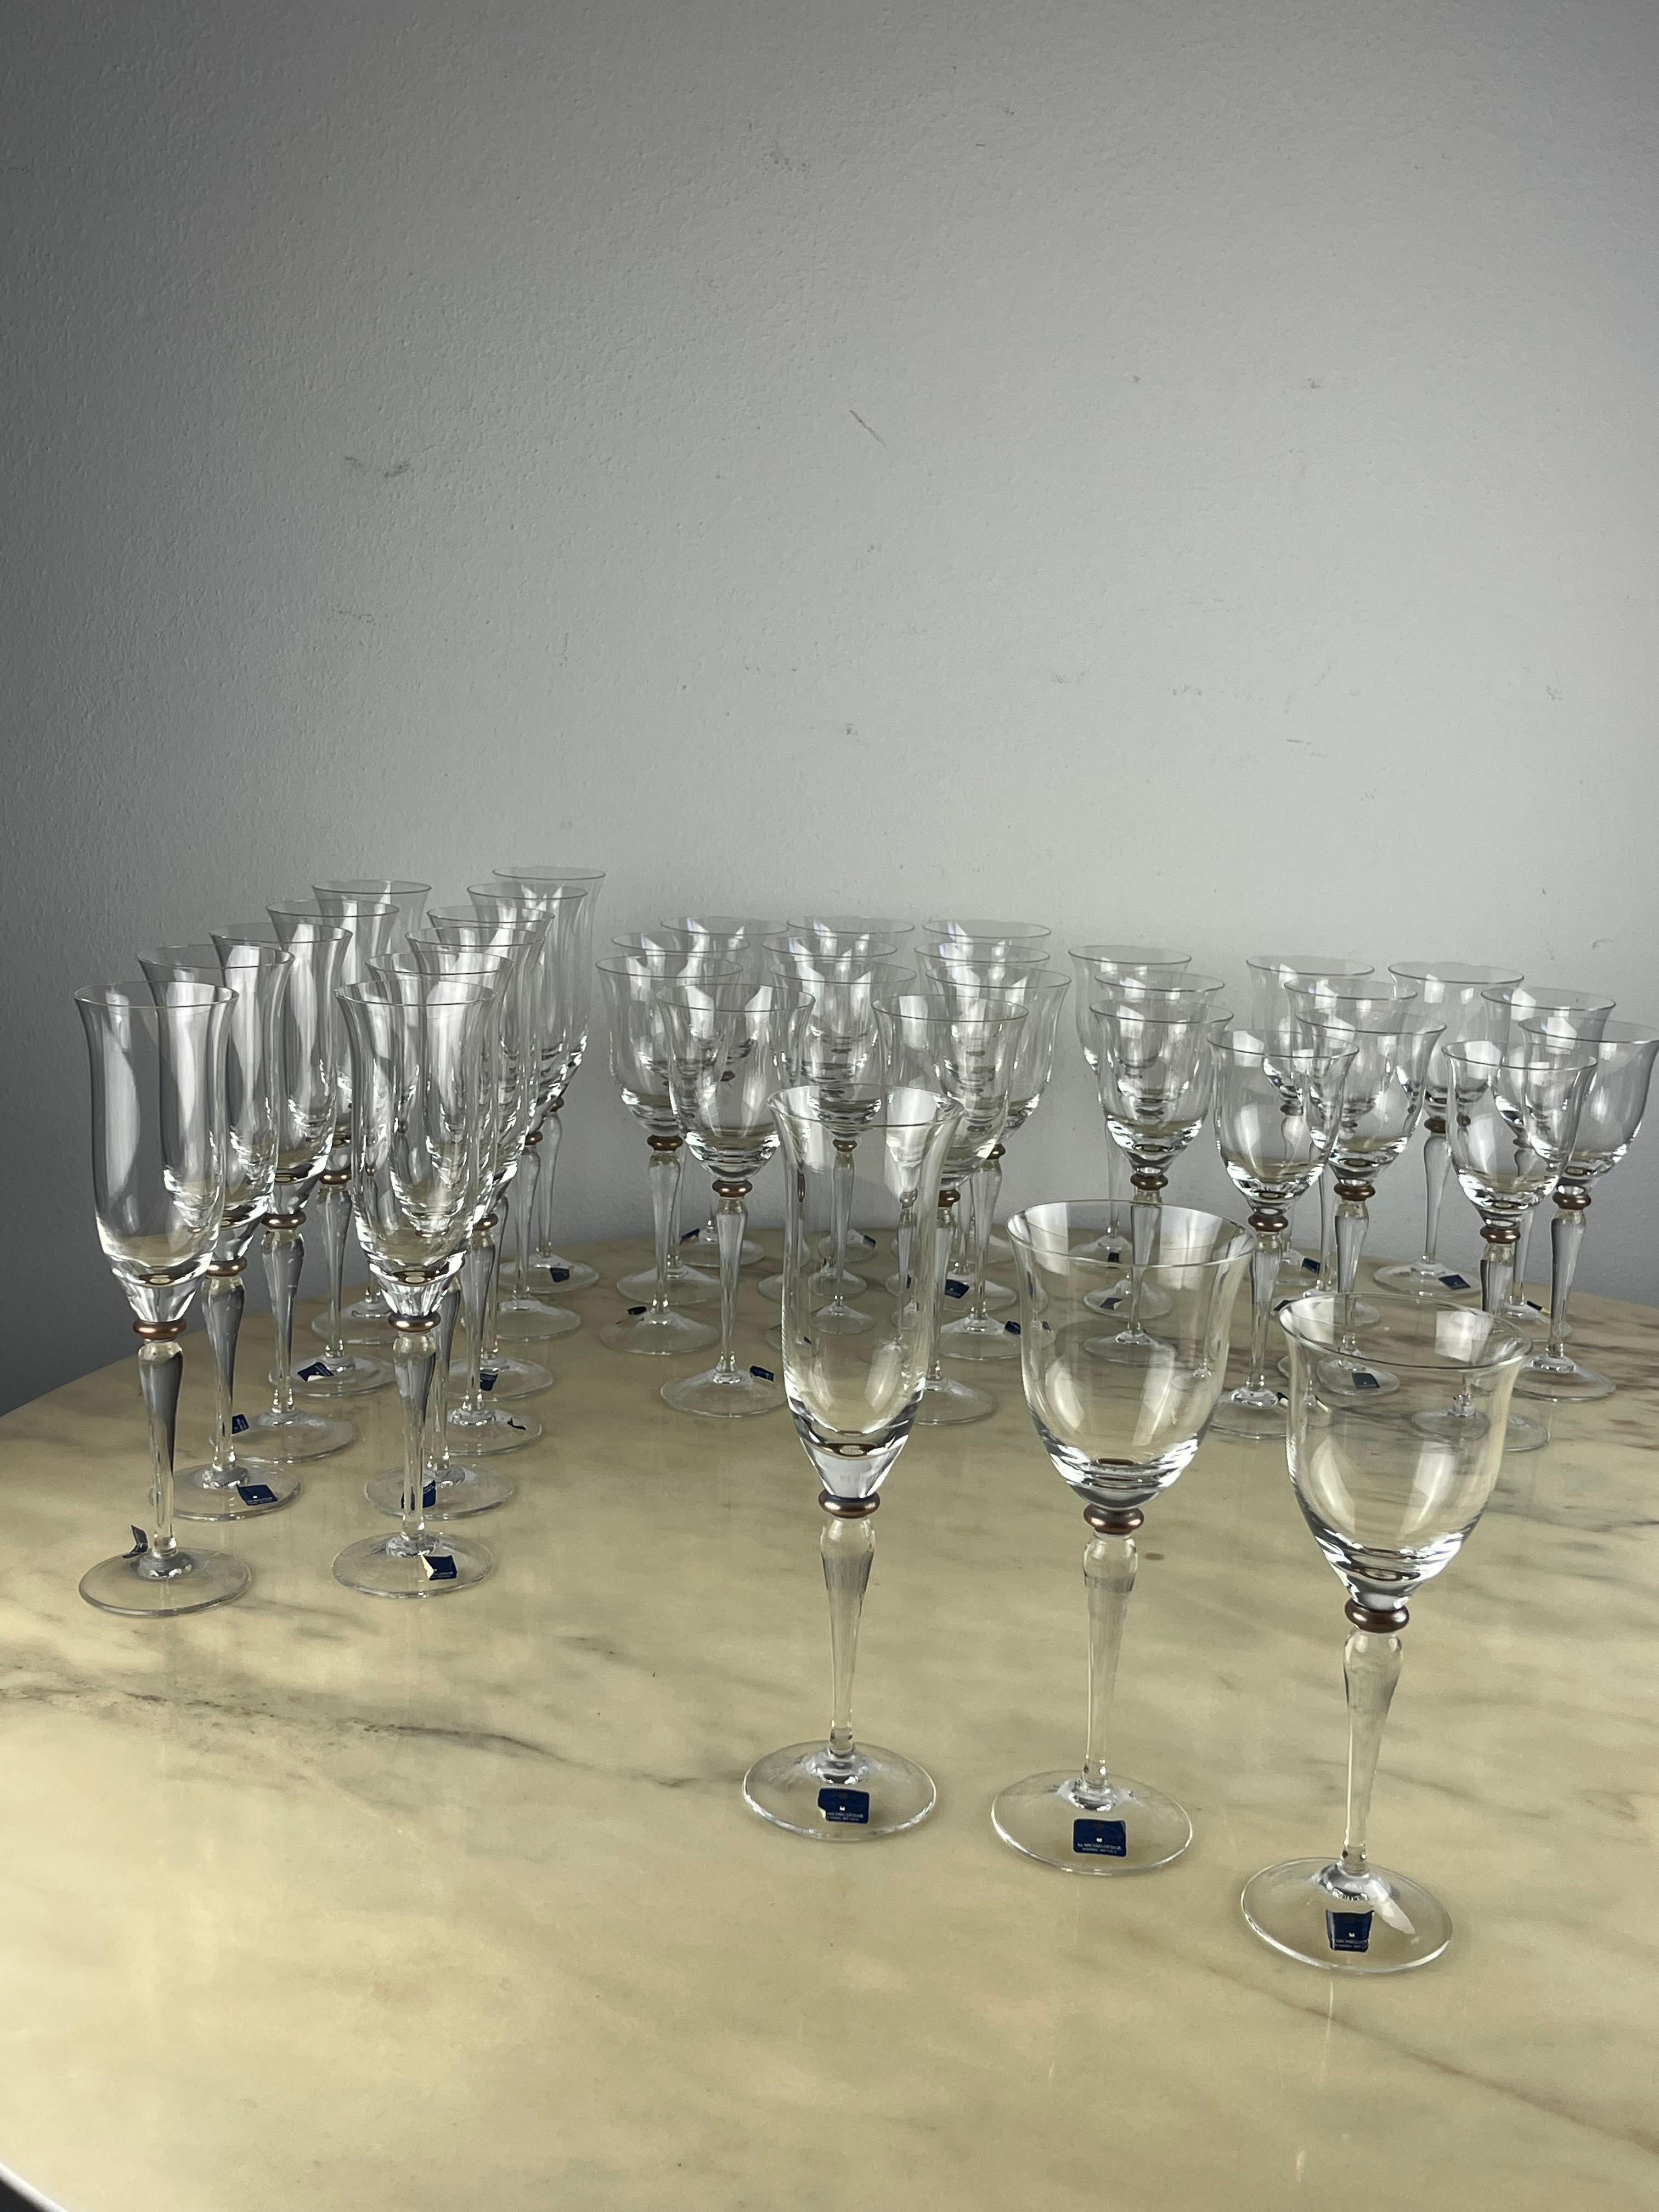 Set 36 pcs. very thin crystal glasses, Czech Republic, 80s. Never used. Bohemia crystal.
Purchased from a jeweler who closed his gift business.
12 water glasses (height 22 cm and diameter 8 cm), 12 wine glasses (height 20 cm and diameter 7.5 cm), 12